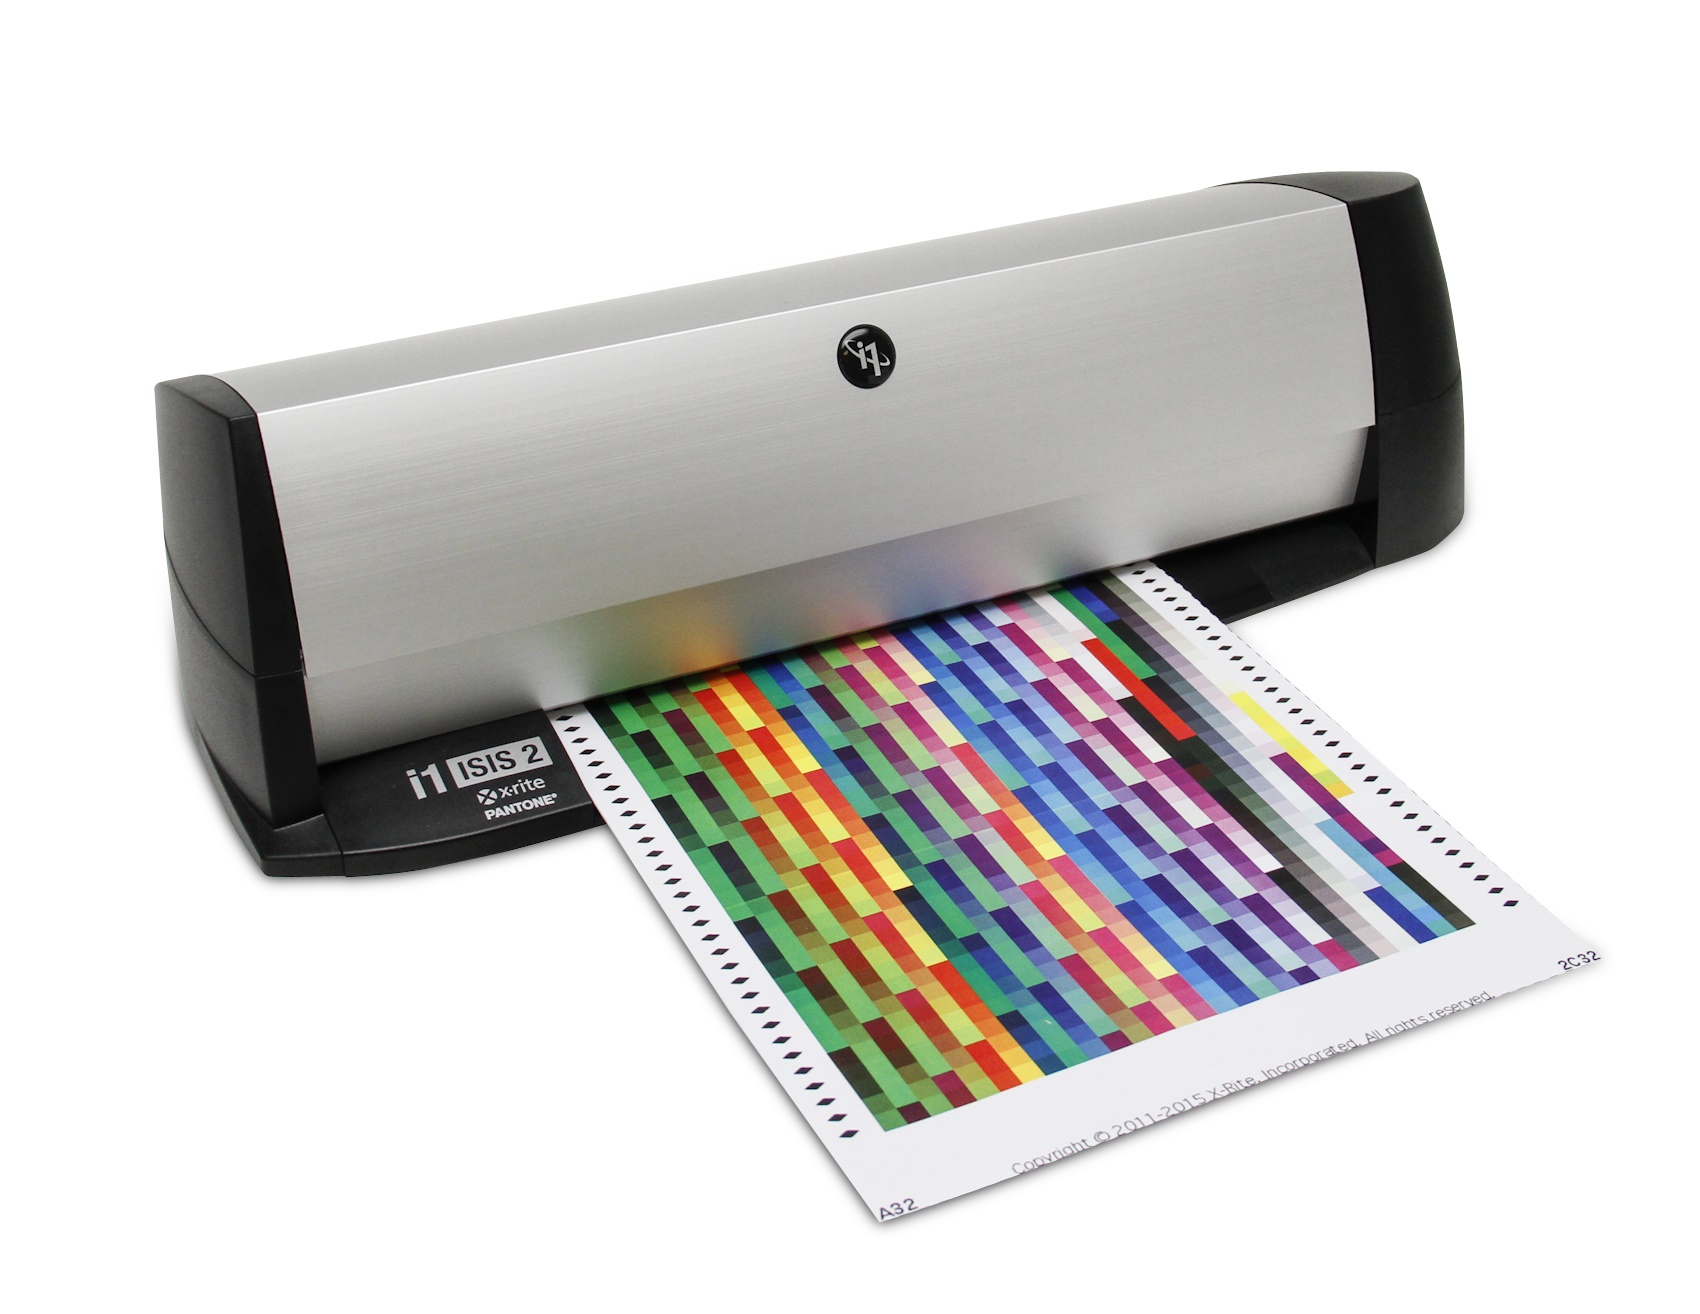 i1iSis 2 automated chart reader is ideal for prepress/premedia, photo and pressroom color management and profiling.